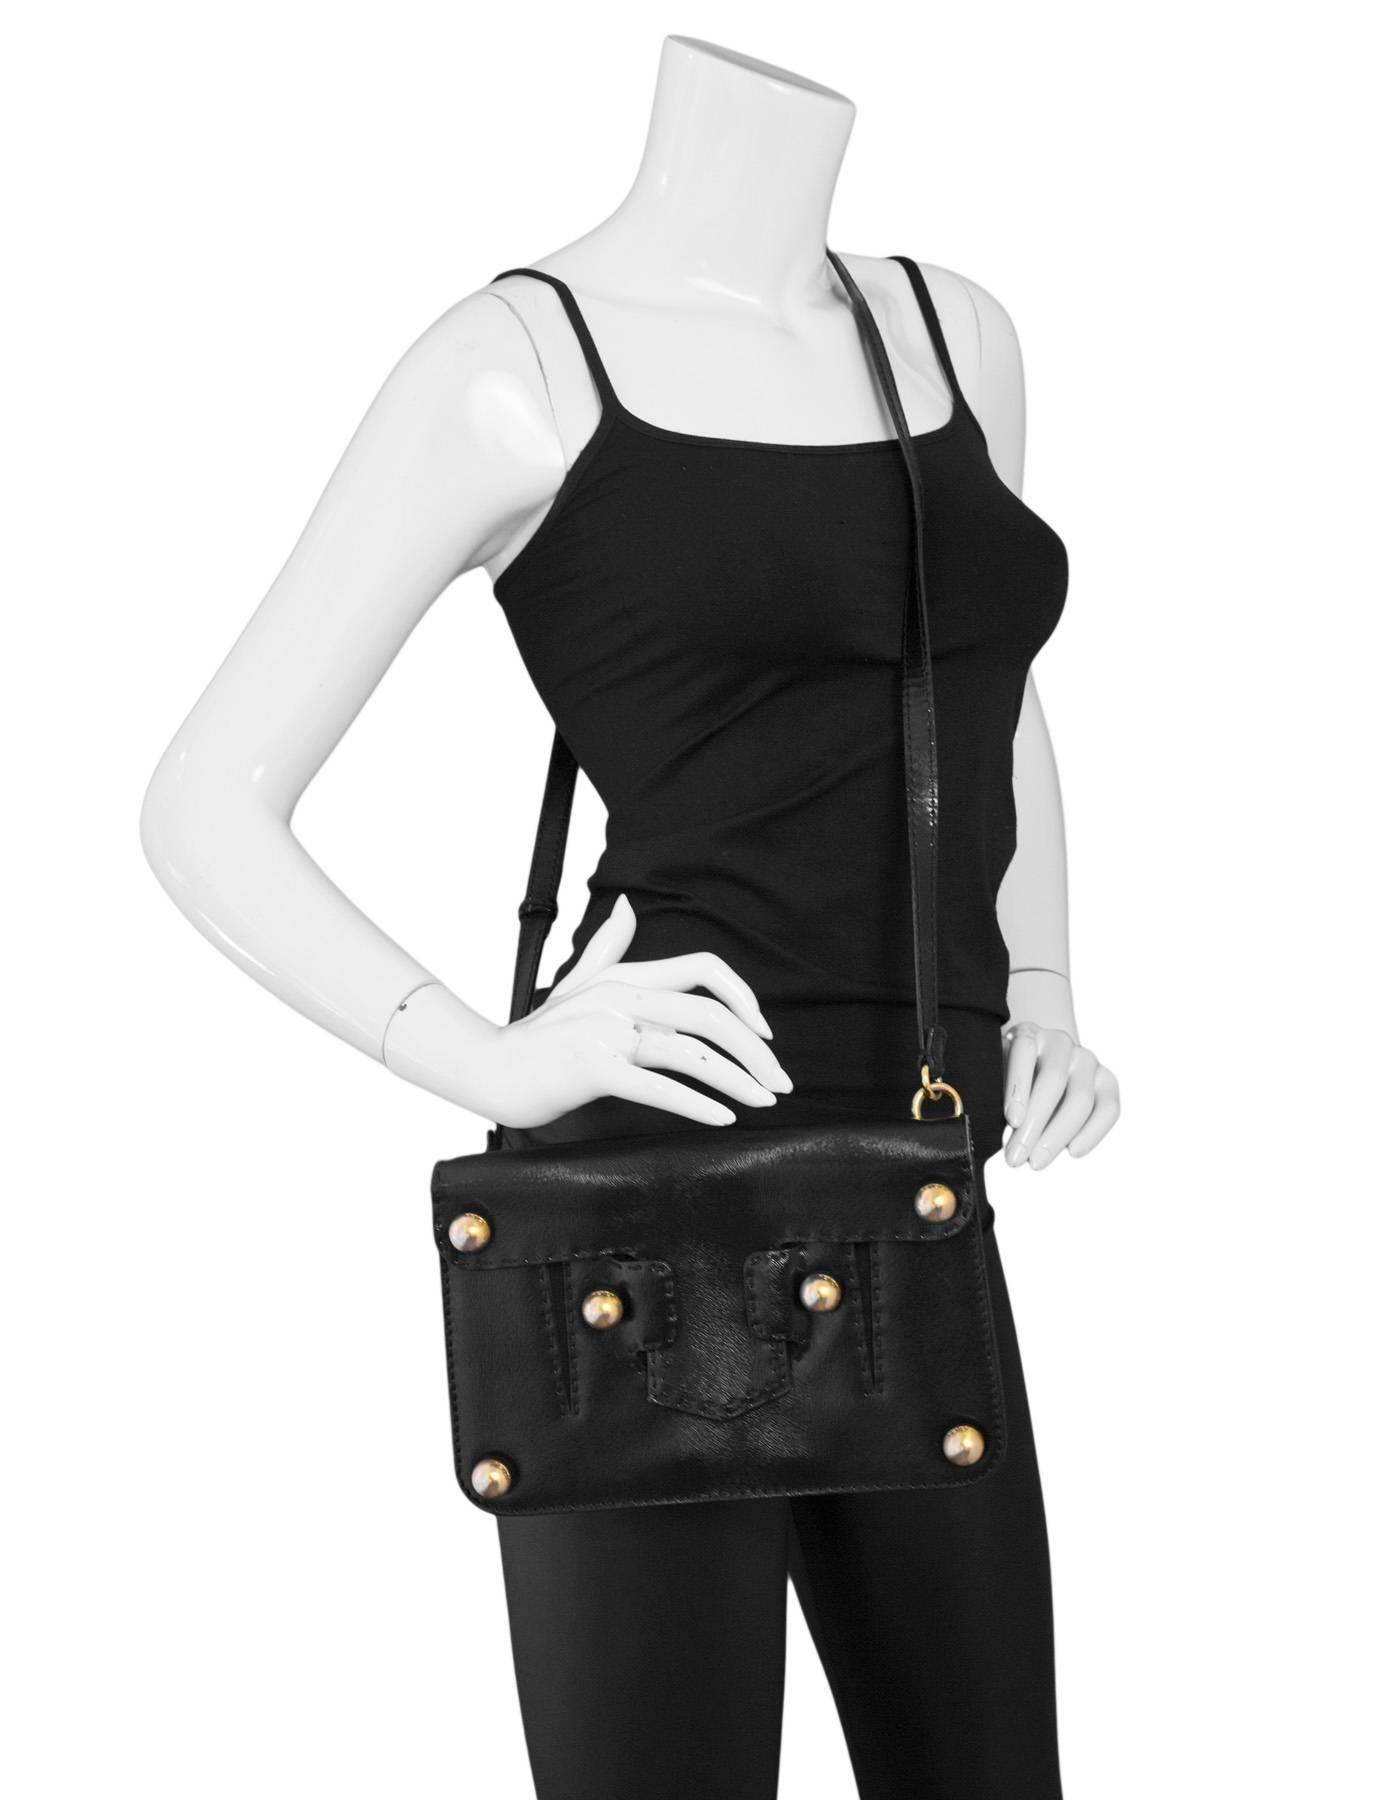 Fendi Black Textured Glazed Leather Studded Crossbody
Optional strap allows bag to be worn as a crossbody or a clutch

Made In: Italy 
Color: Black, gold
Hardware: Goldtone
Materials: Glazed leather, metal
Lining: Brown textile
Closure/opening: Flap